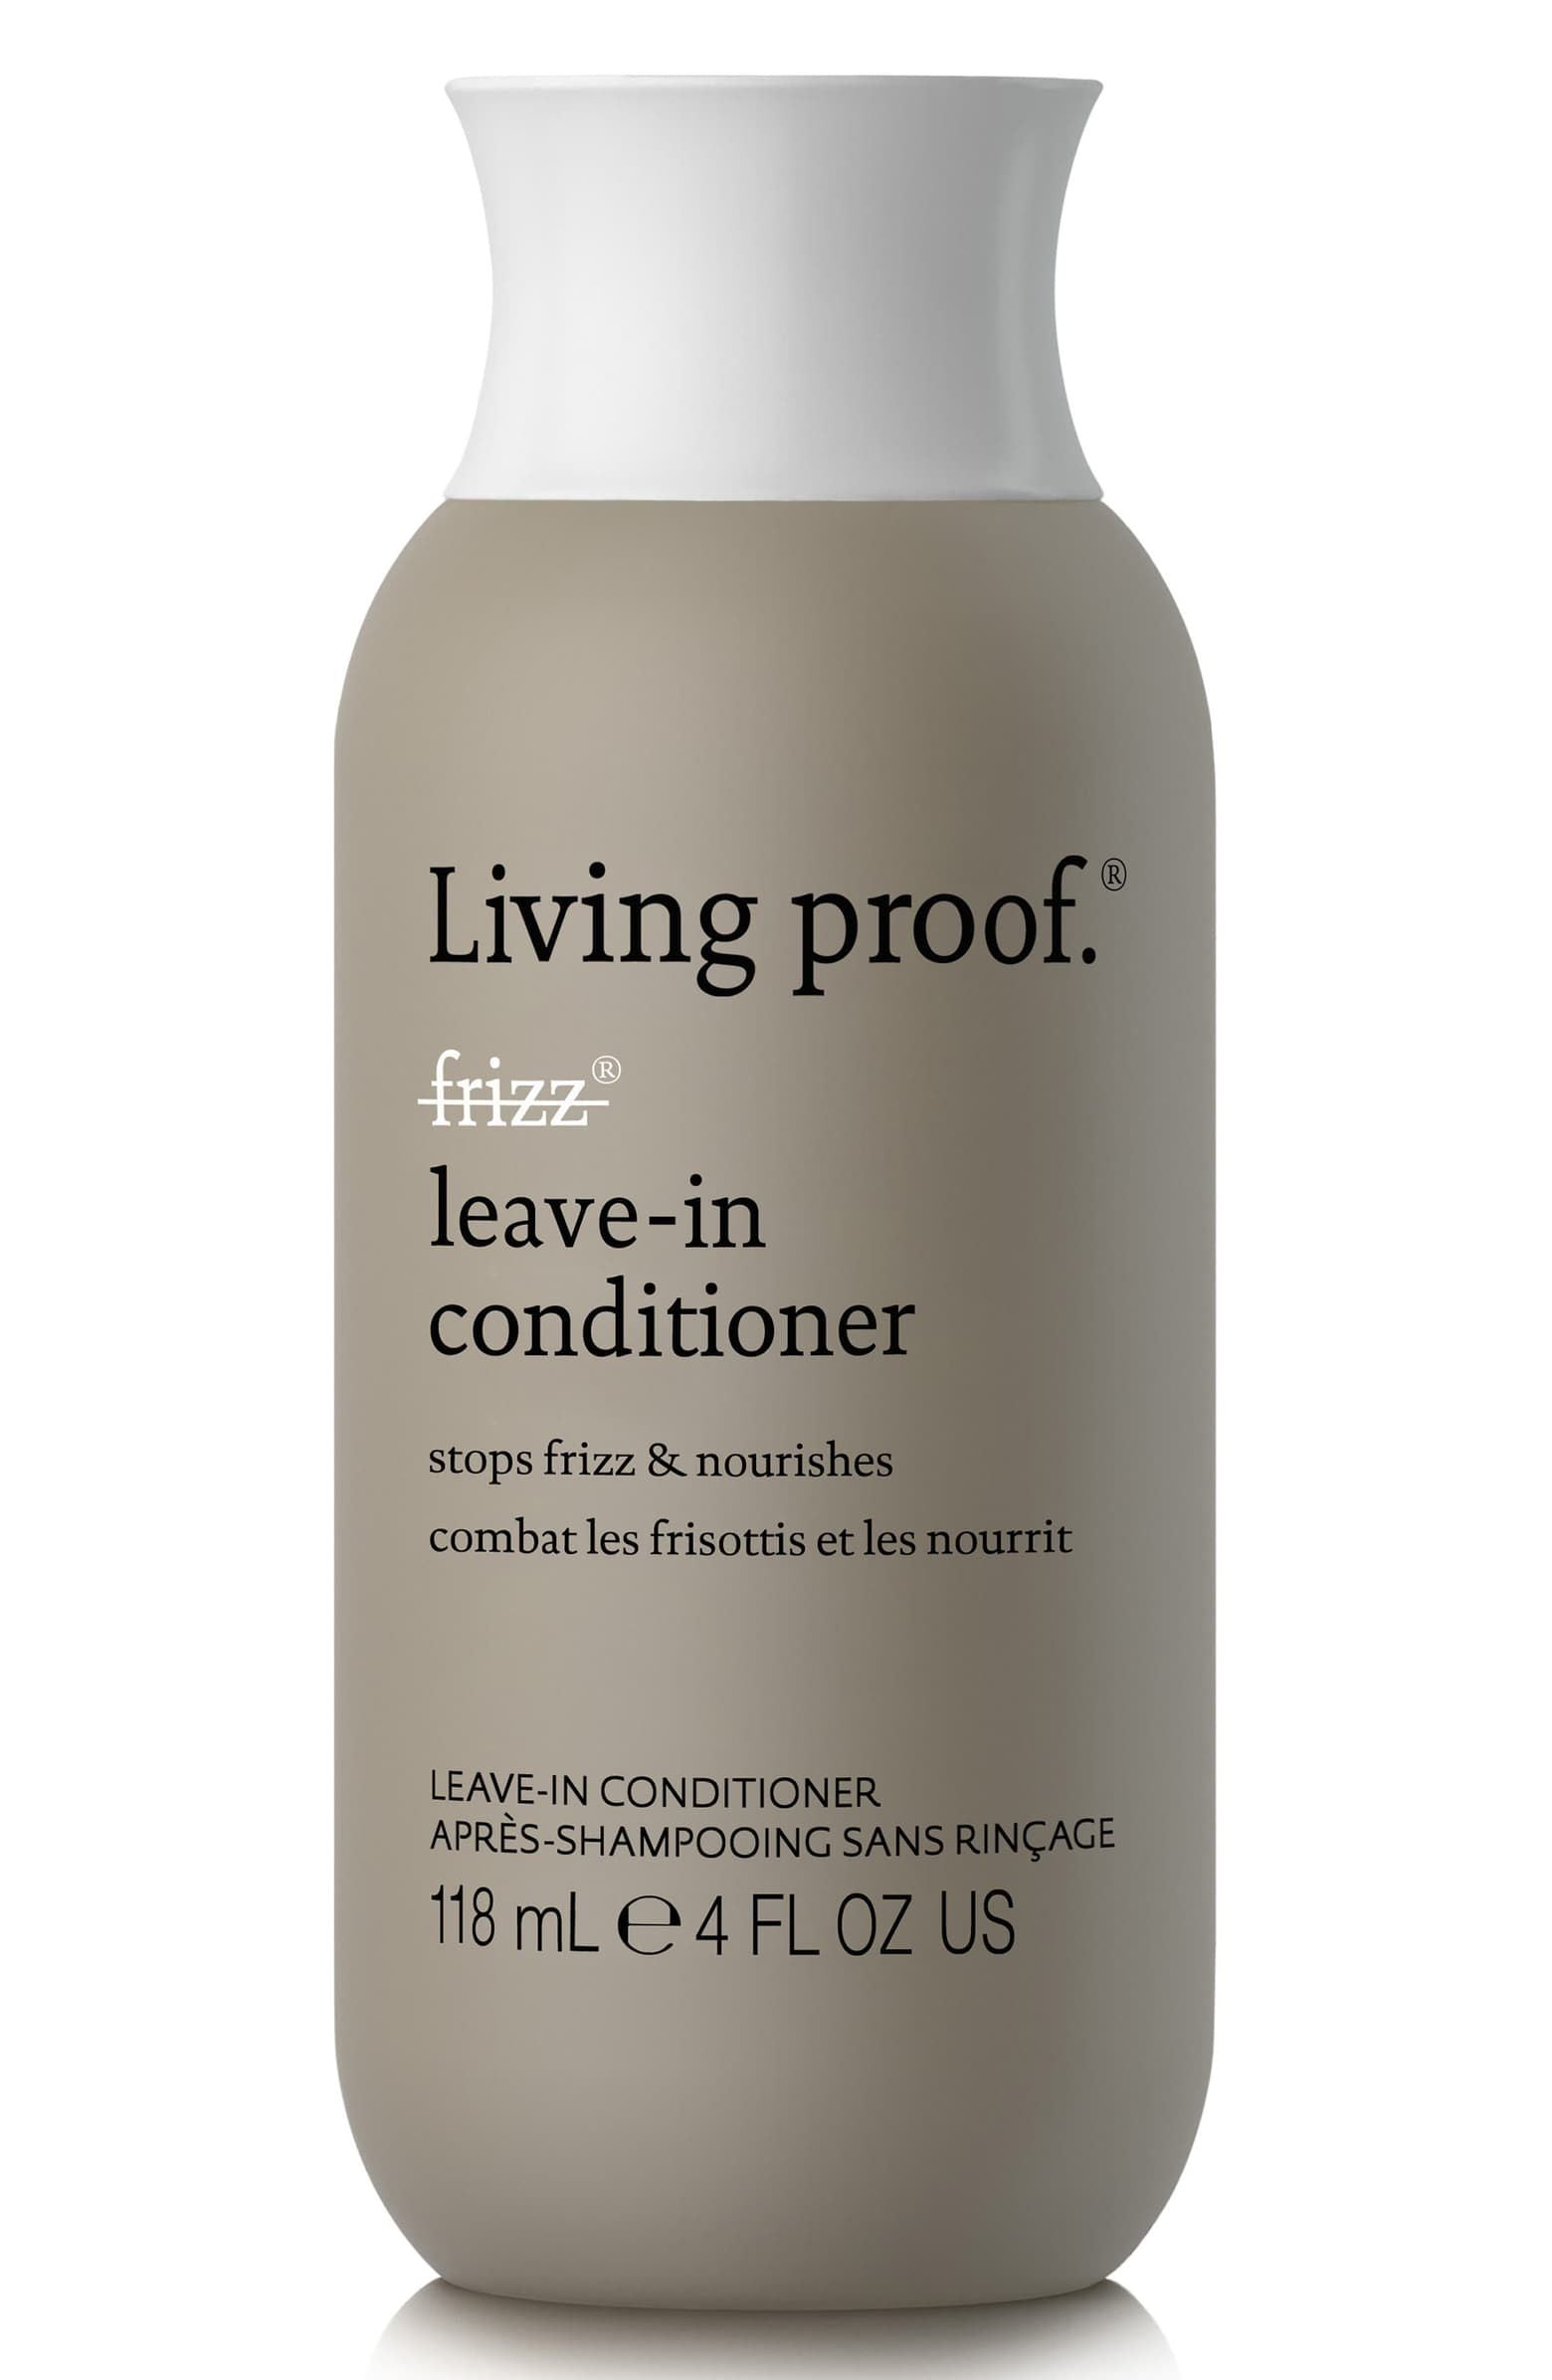 The Top Ingredients to Look for in Men's Hair Conditioner